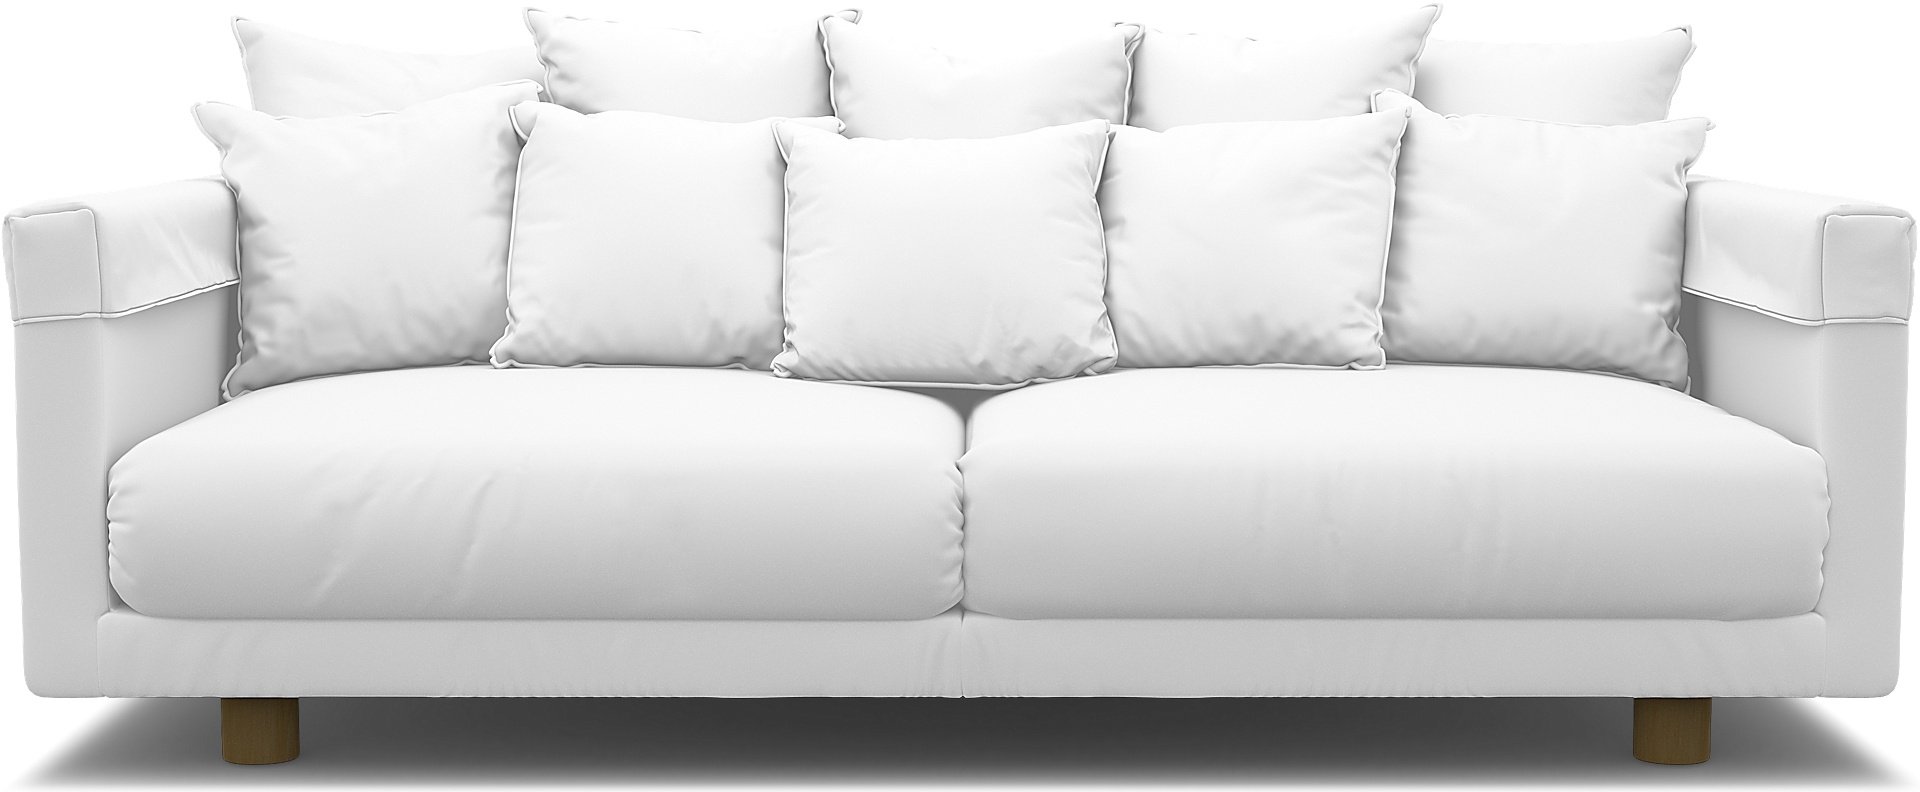 IKEA - Stockholm 2017 3 Seater Sofa Cover, Absolute White, Linen - Bemz